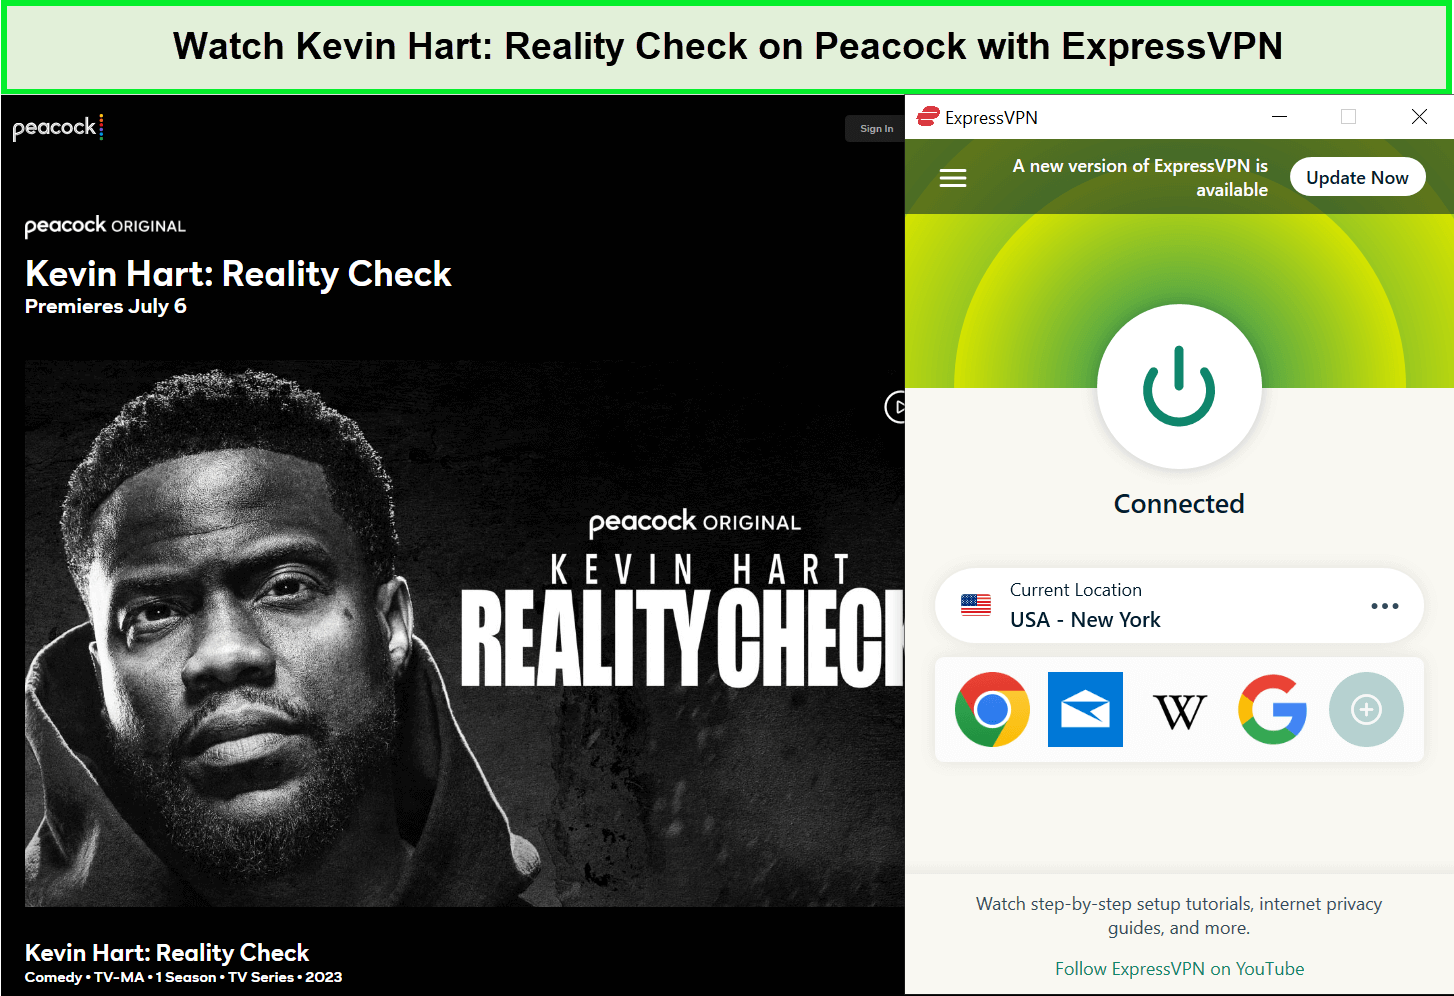 Watch-Kevin-Hart-Reality-Check-in-Italy-on-Peacock-with-ExpressVPN